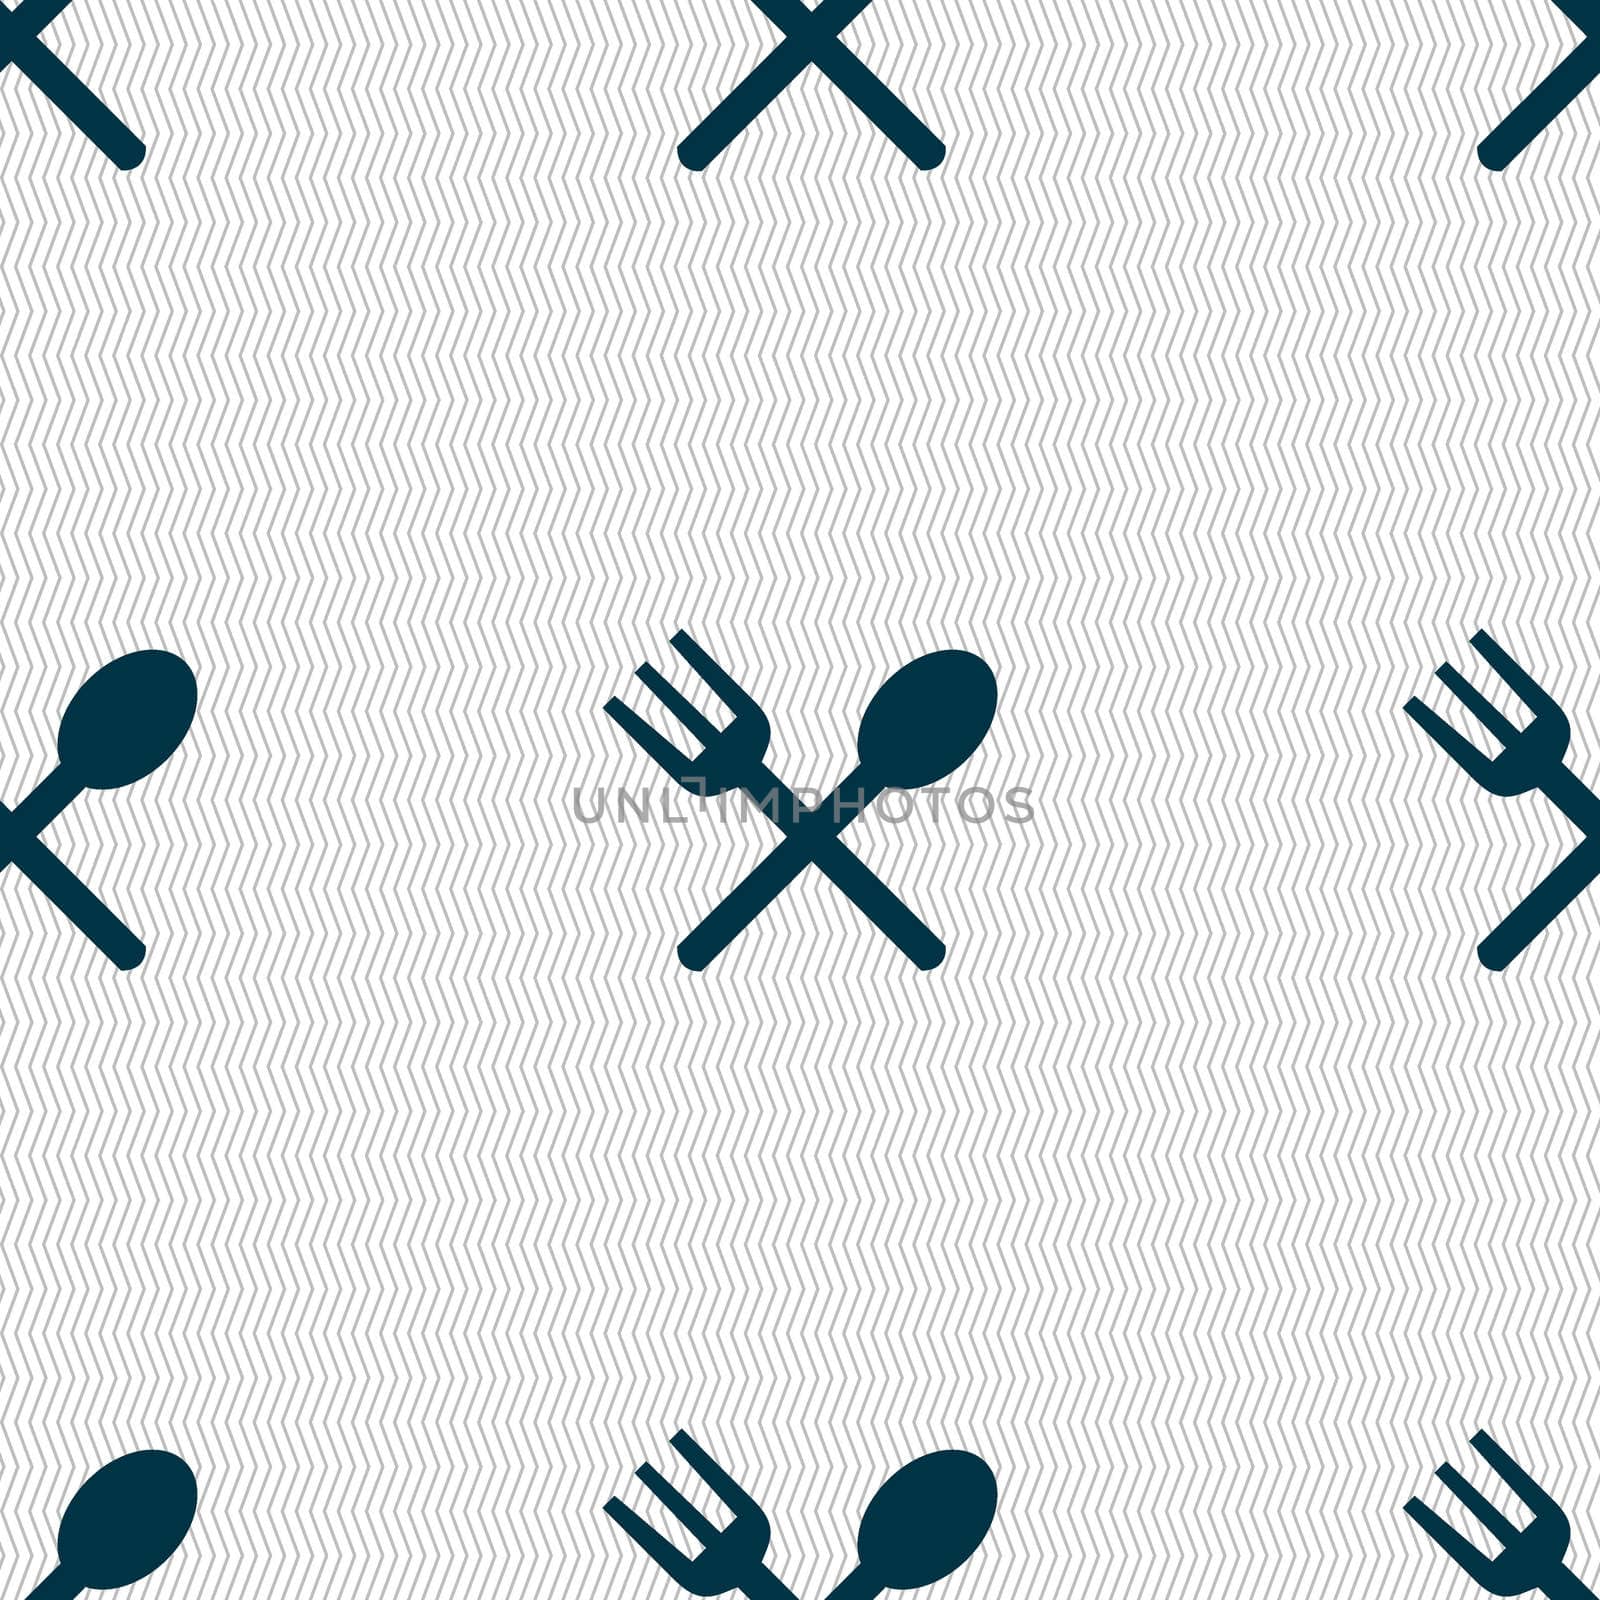 Fork and spoon crosswise, Cutlery, Eat icon sign. Seamless abstract background with geometric shapes.  by serhii_lohvyniuk